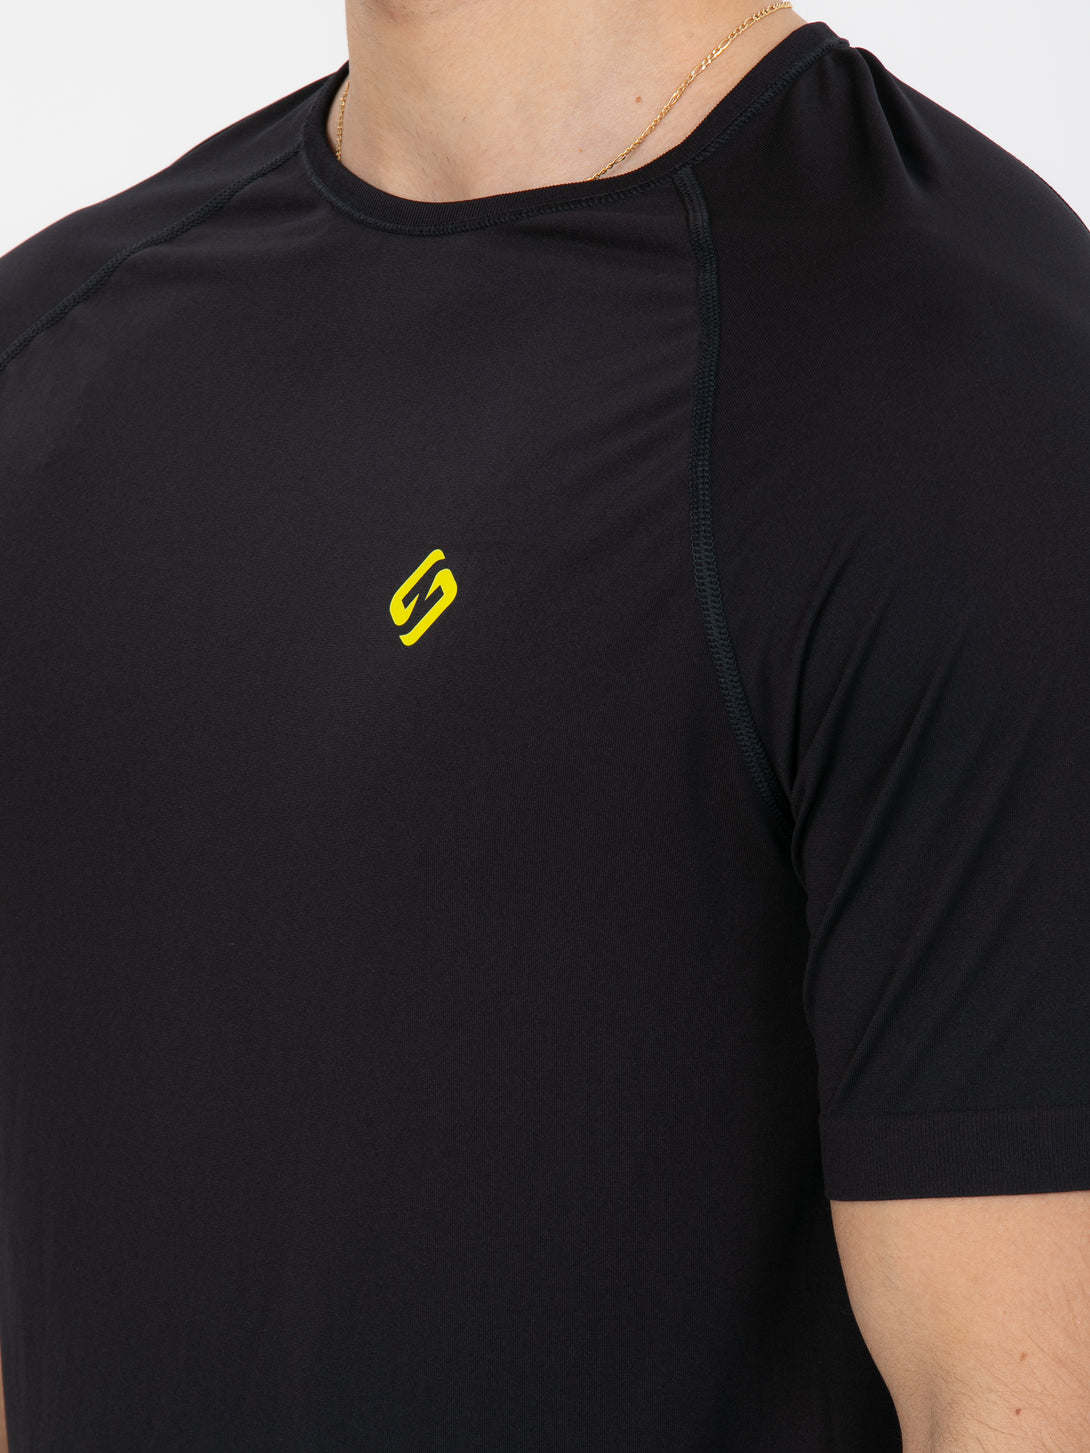 A Man Wearing Black Color Seamless The Motion T-Shirt